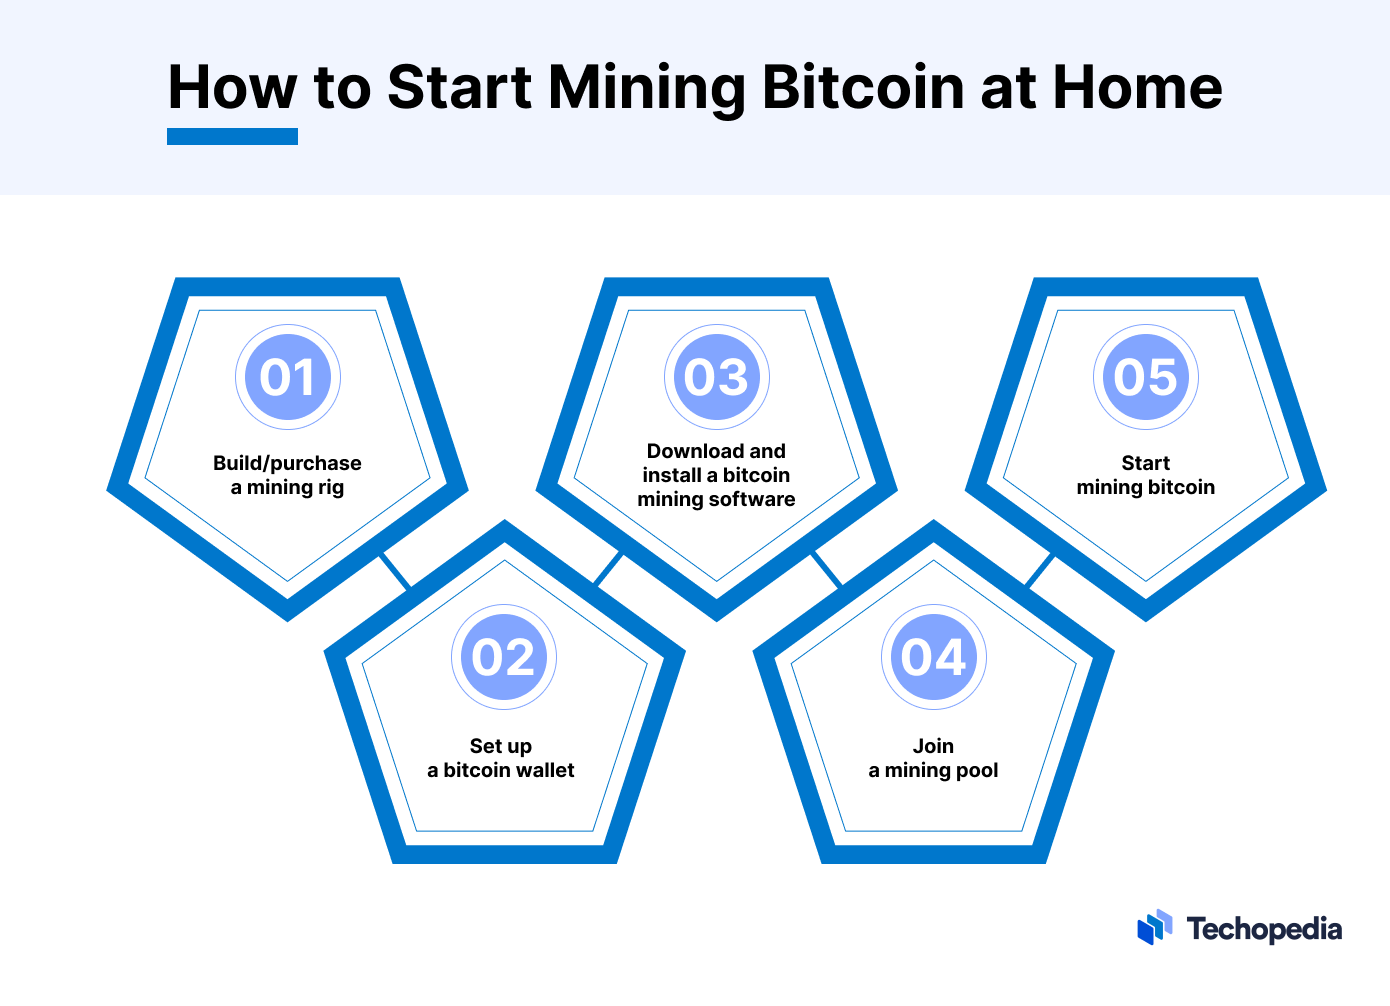 How to Start Mining BTC at Home